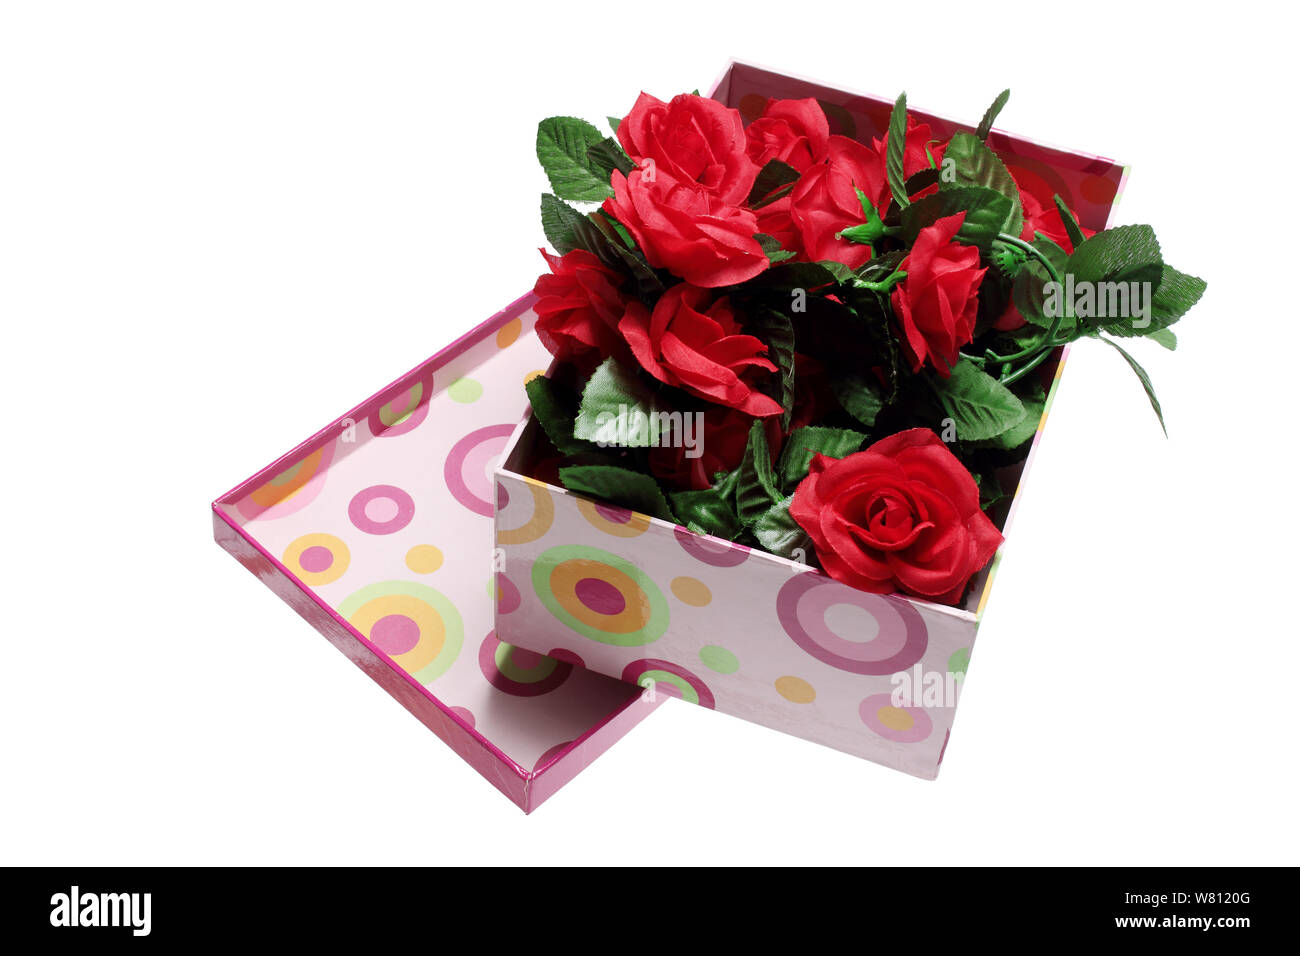 Box of Red Roses on White Background Stock Photo